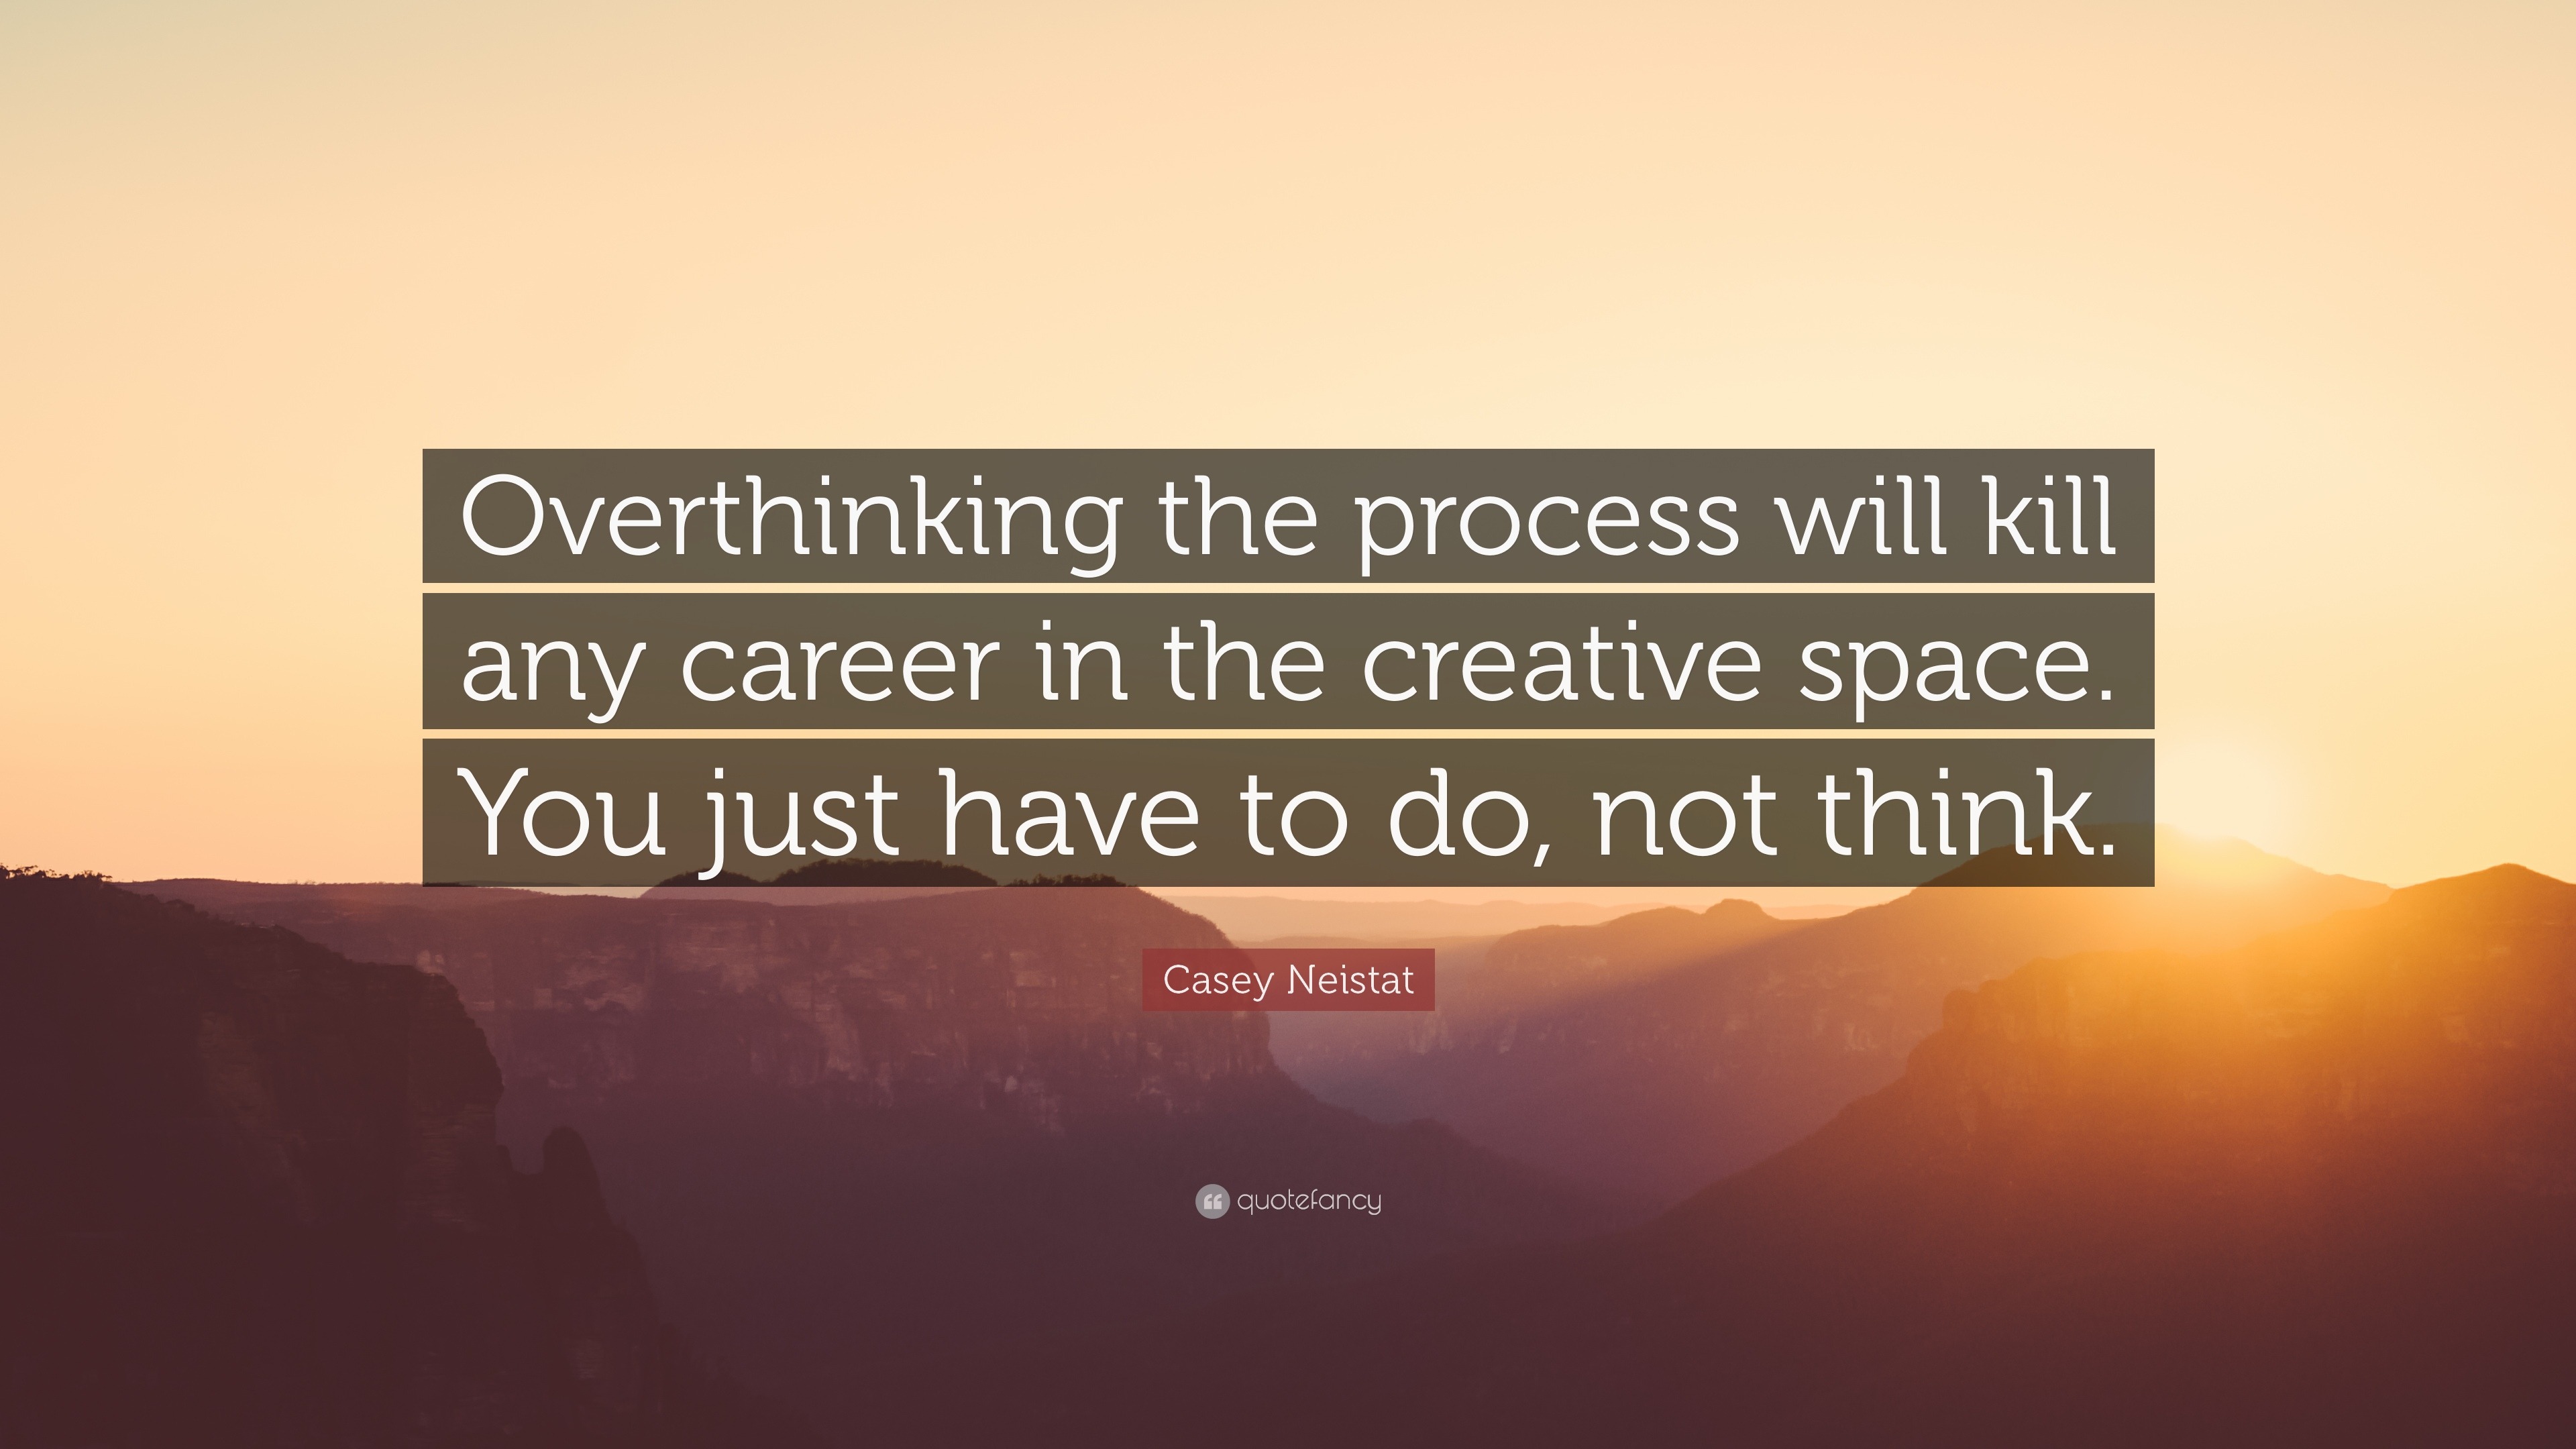 Casey Neistat Quote: "Overthinking the process will kill any career in...